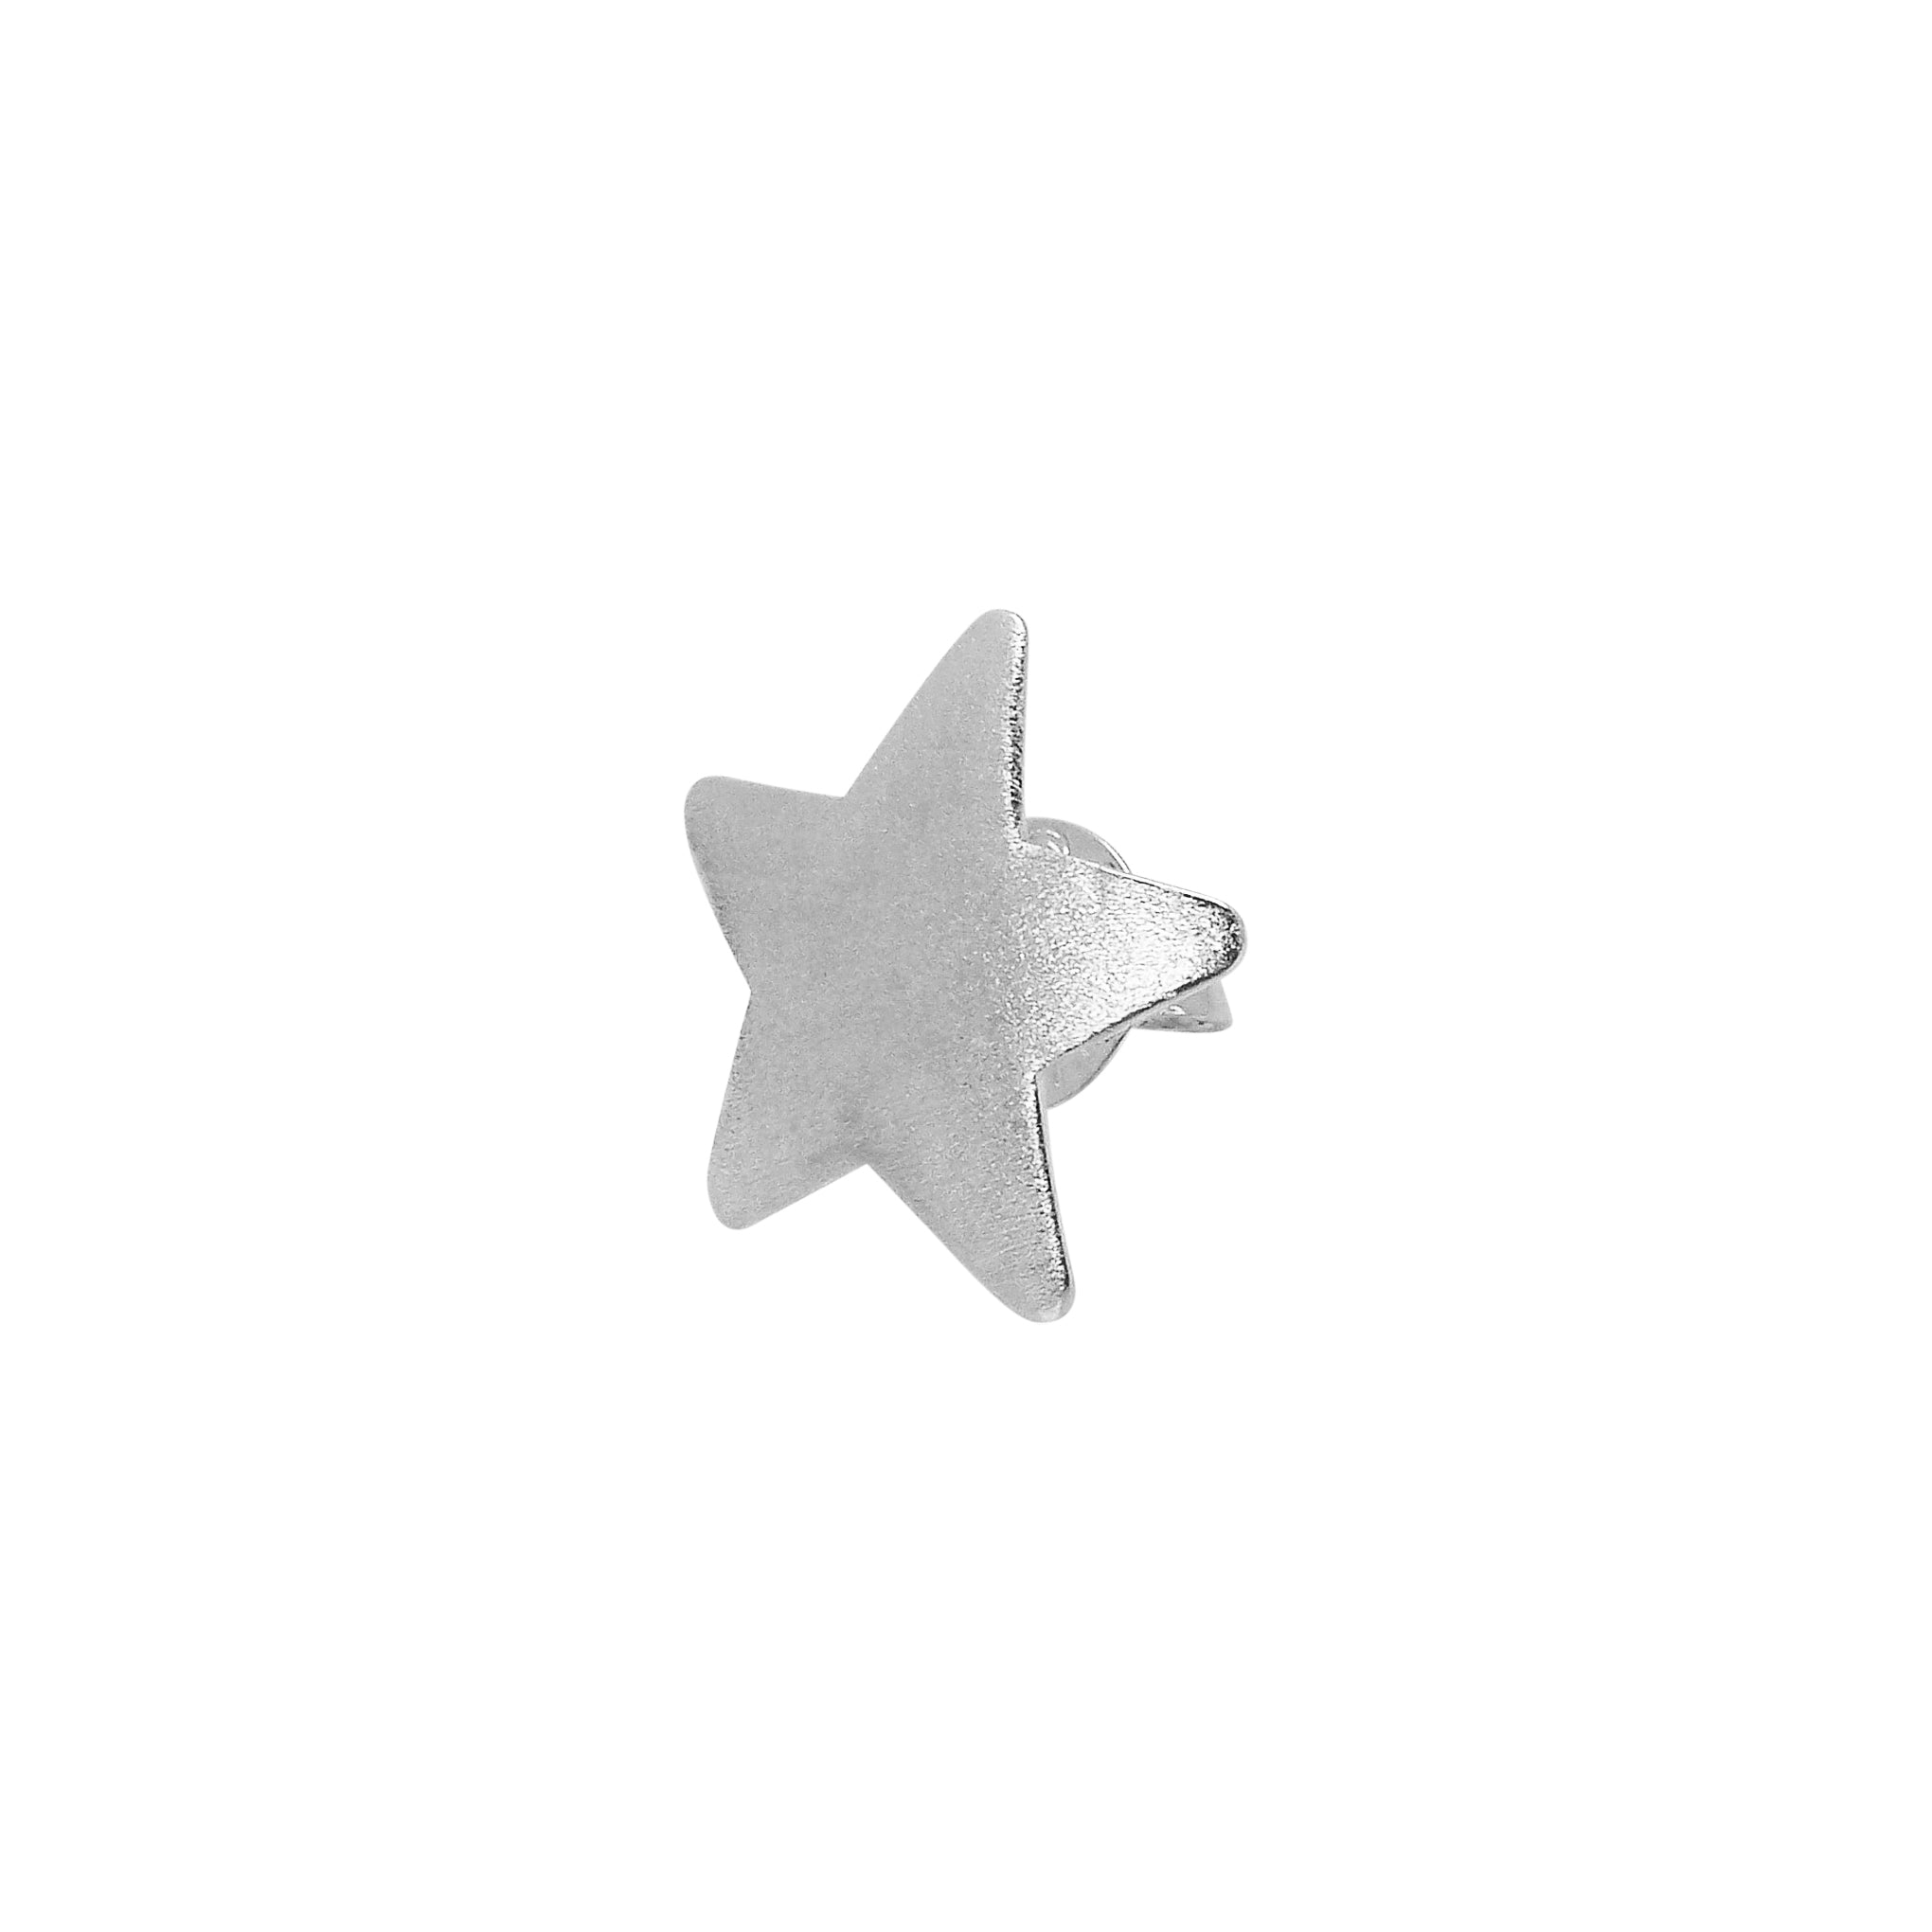 single 45 degree angle image of Sheila Fajl Lana Star Stud Earrings in Brushed Silver Plated